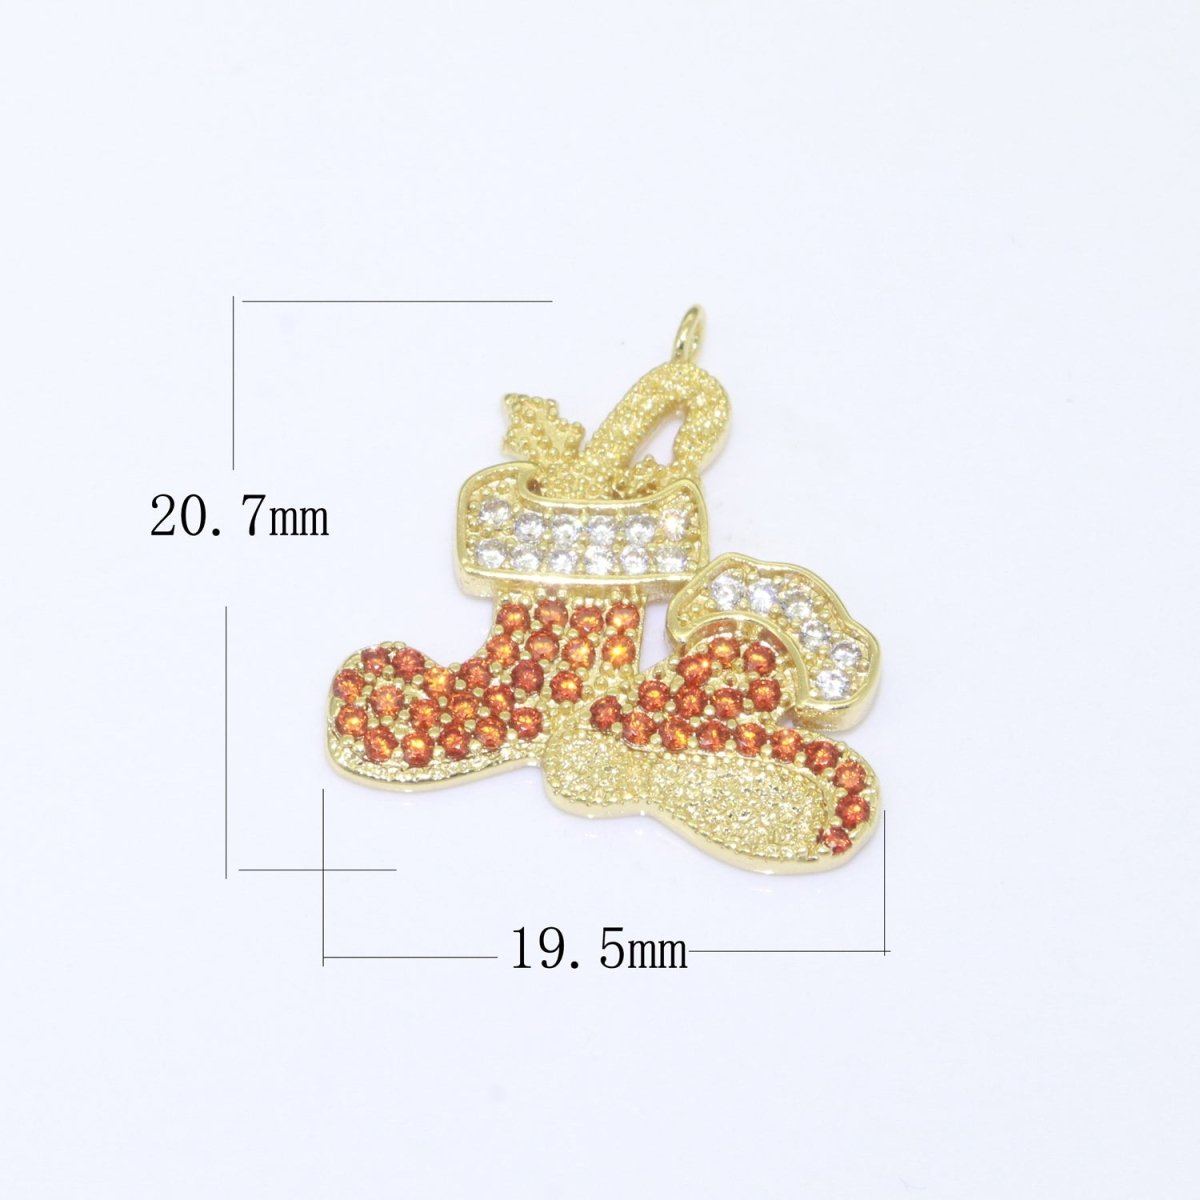 Dainty Christmas charms Micro Pave Holiday Collection Santa, Snow, Stocking, Snow man, Reindeer, Tree Pendant for DiY Jewelry Necklace Bracelet Earring Accessory F-902 F-903 M-594 - M-604 - DLUXCA